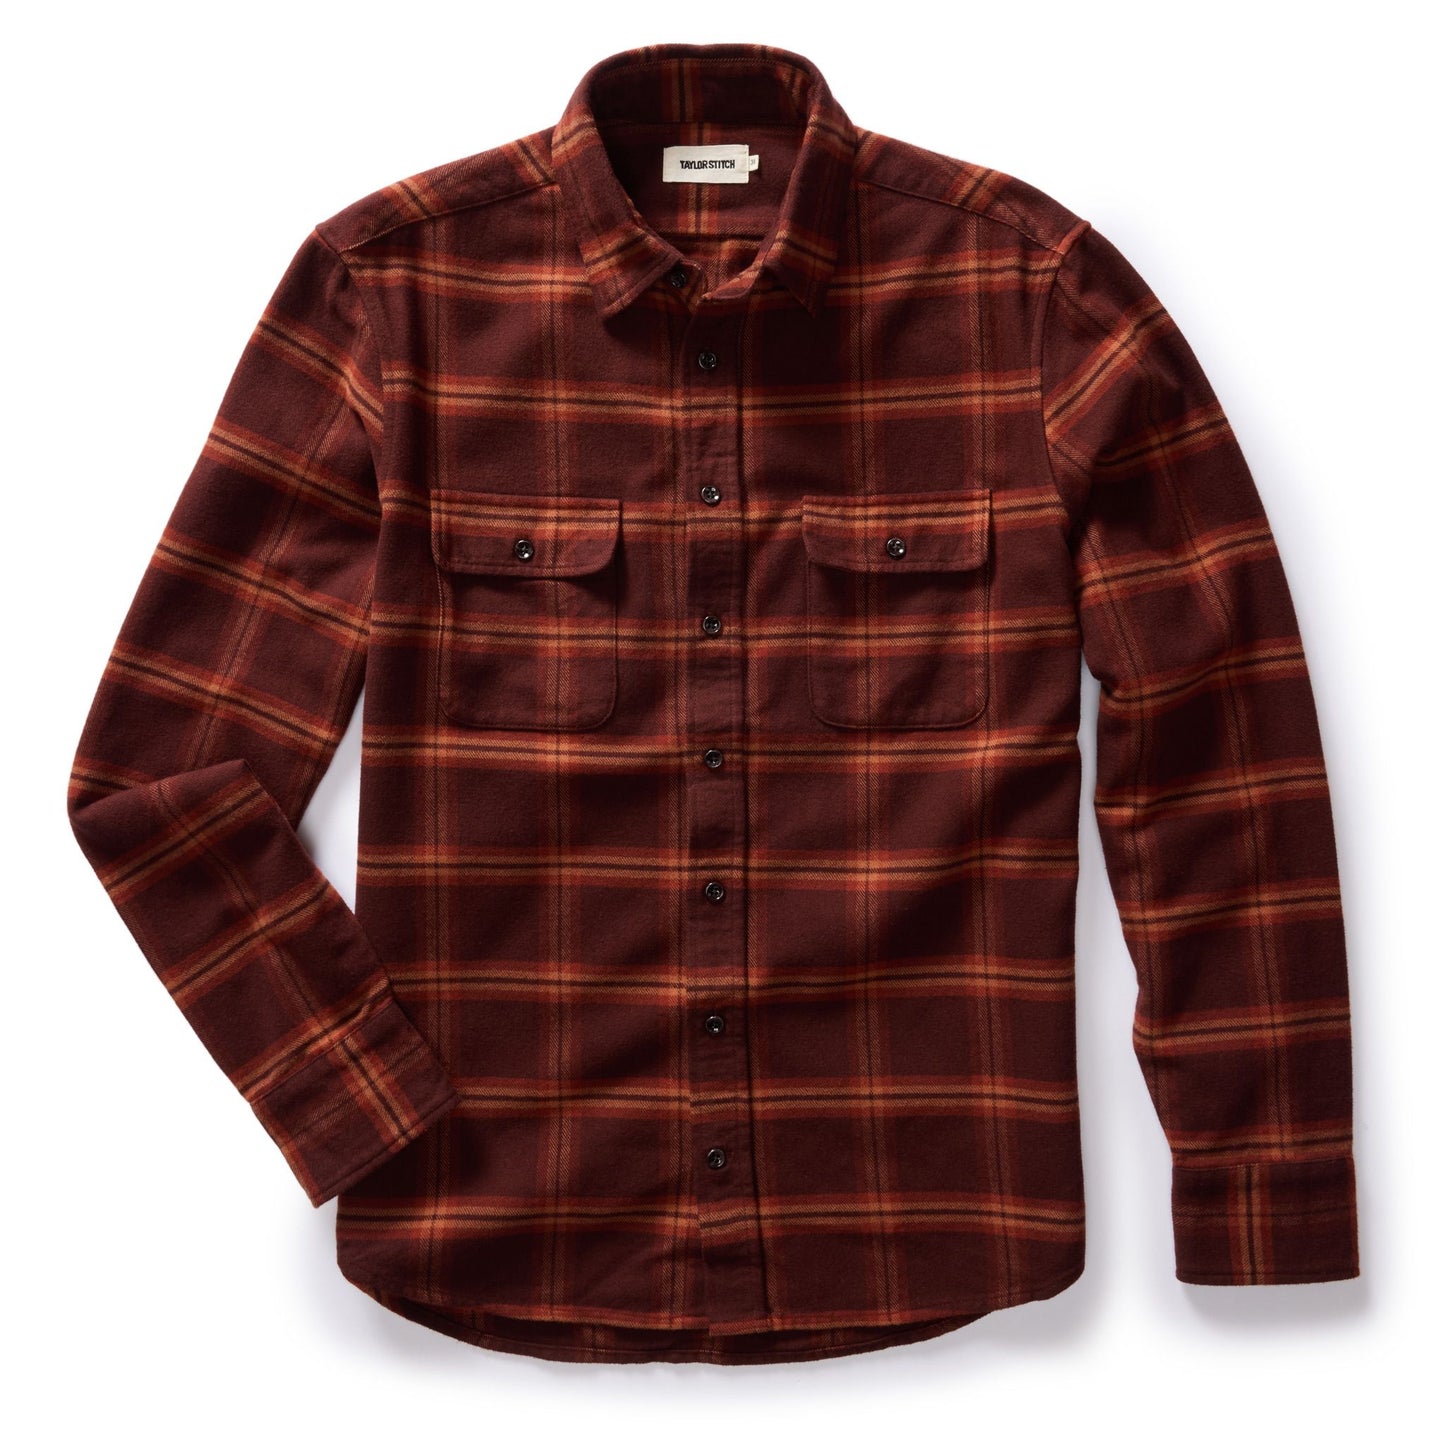 The Yosemite Shirt in Burnt Toffee Plaid